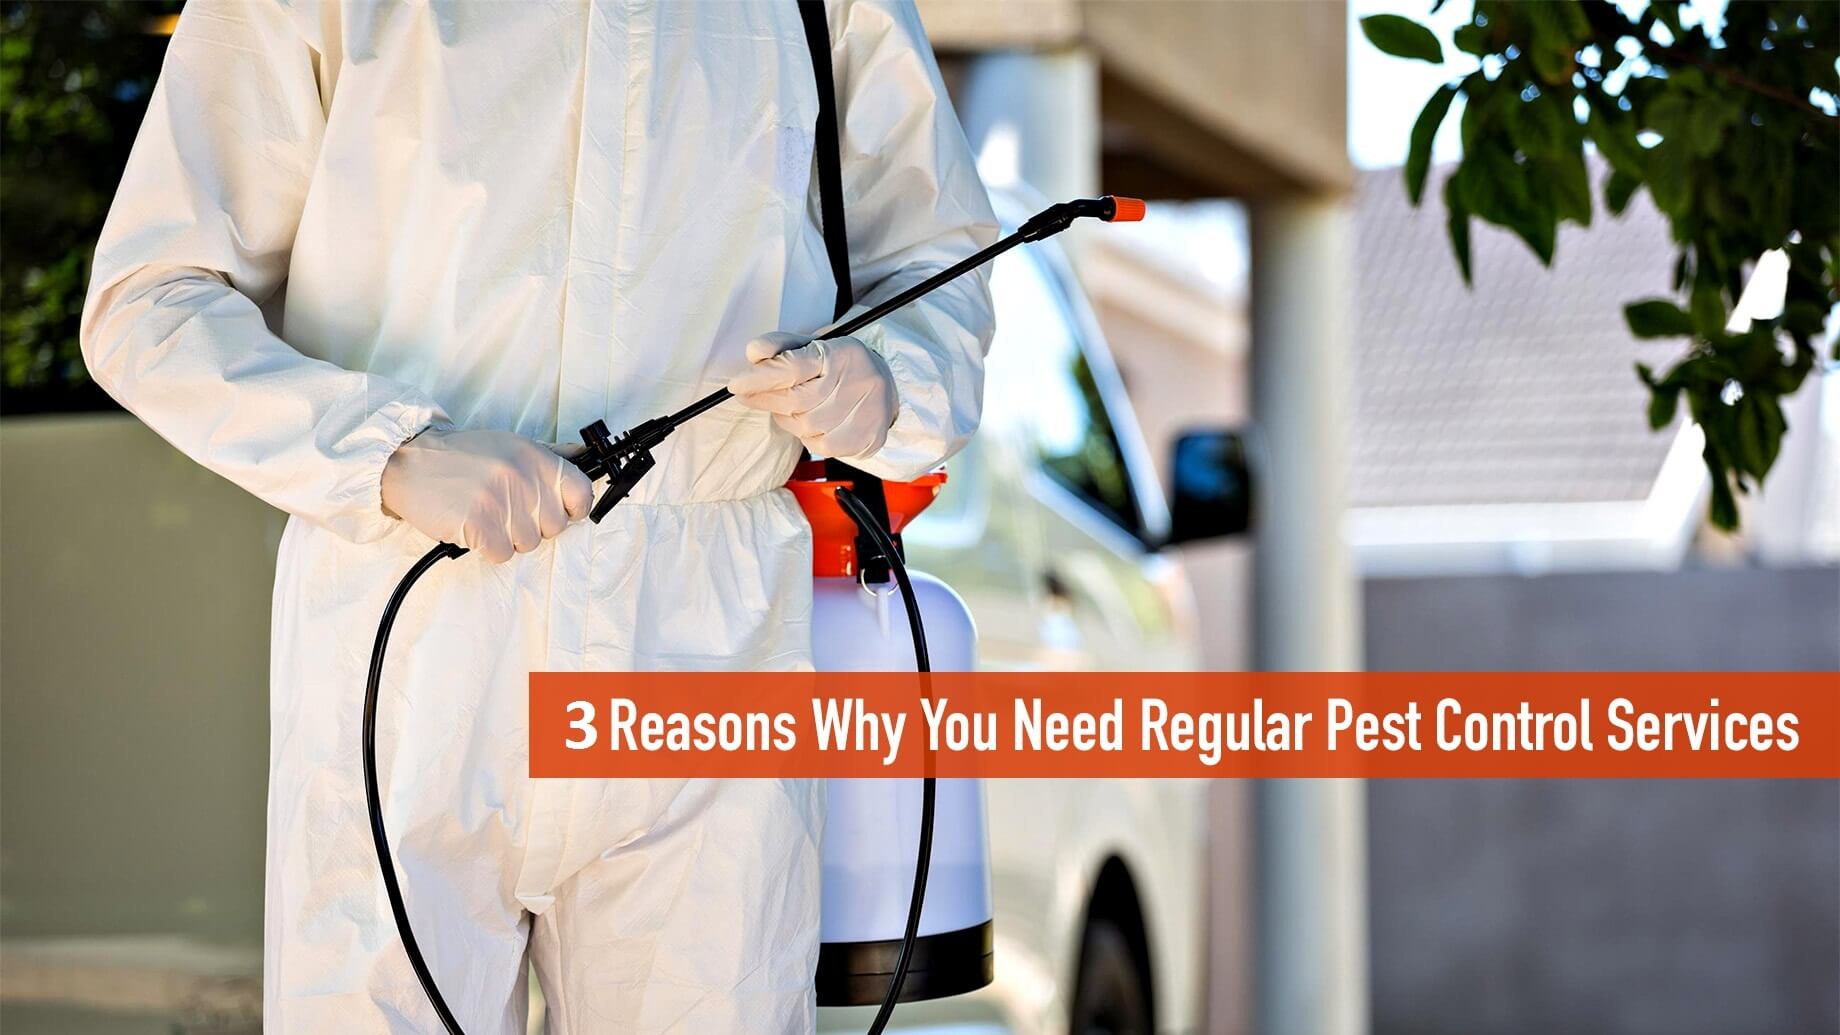 3 Reasons Why You Need Regular Pest Control Services